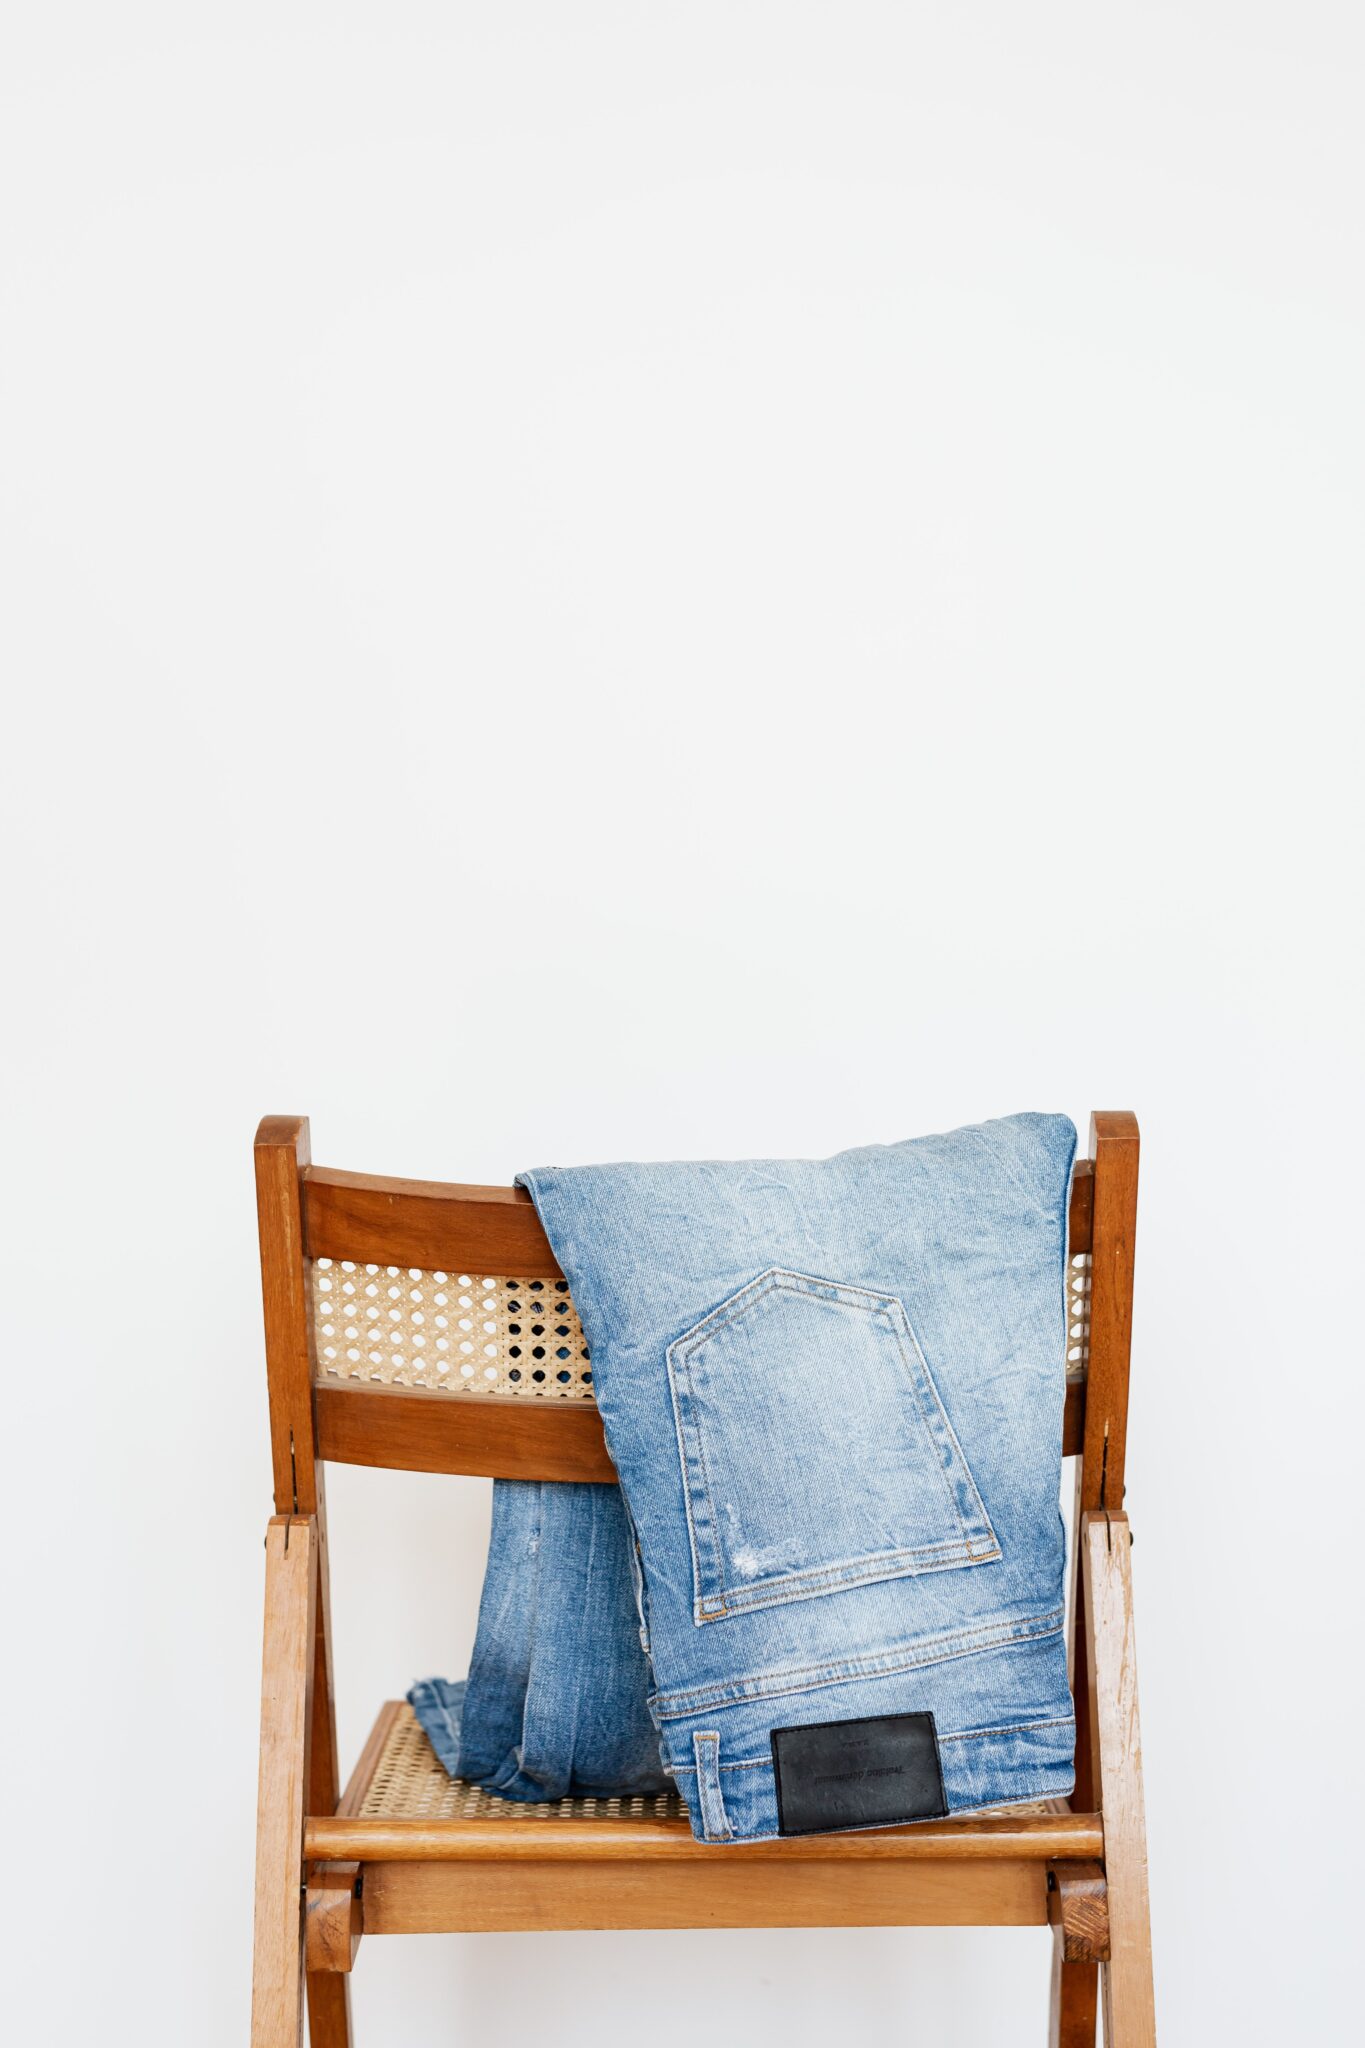 A pair of jeans hangs over a wooden chair. This article covers 4 things you should know if you plan to start a clothing business.